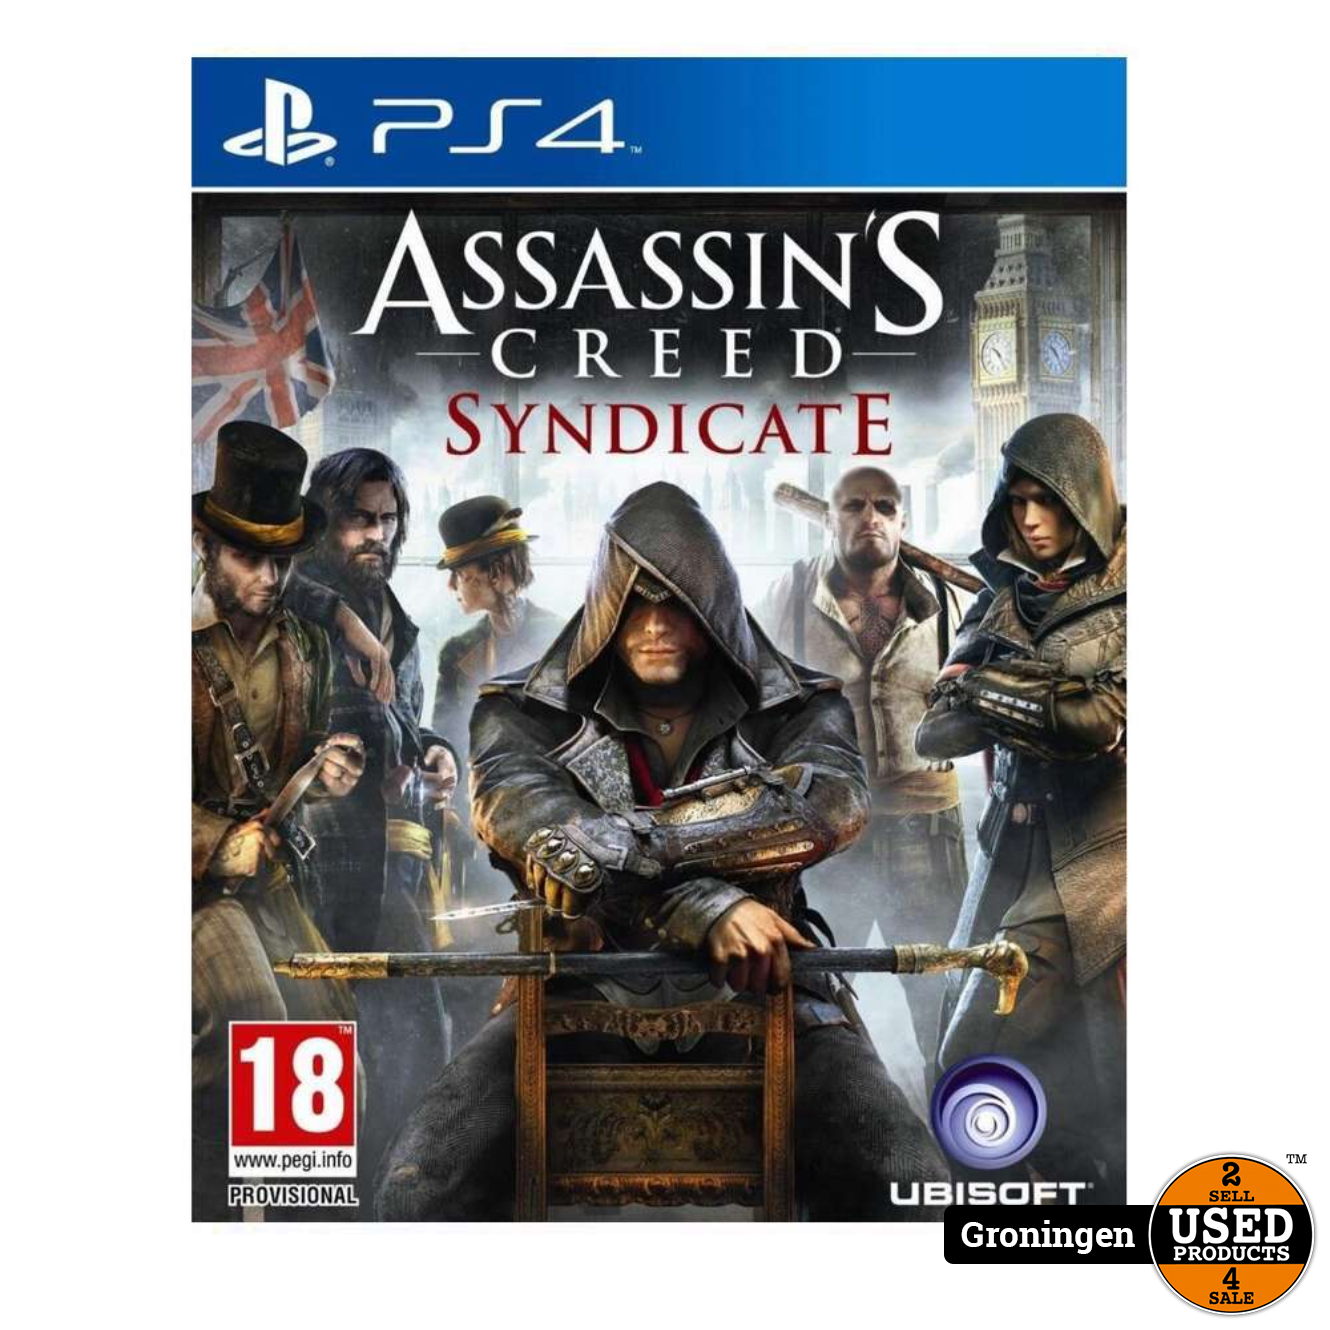 Rendezvous Zwitsers Transformator PS4] Assassin's Creed: Syndicate - Used Products Groningen